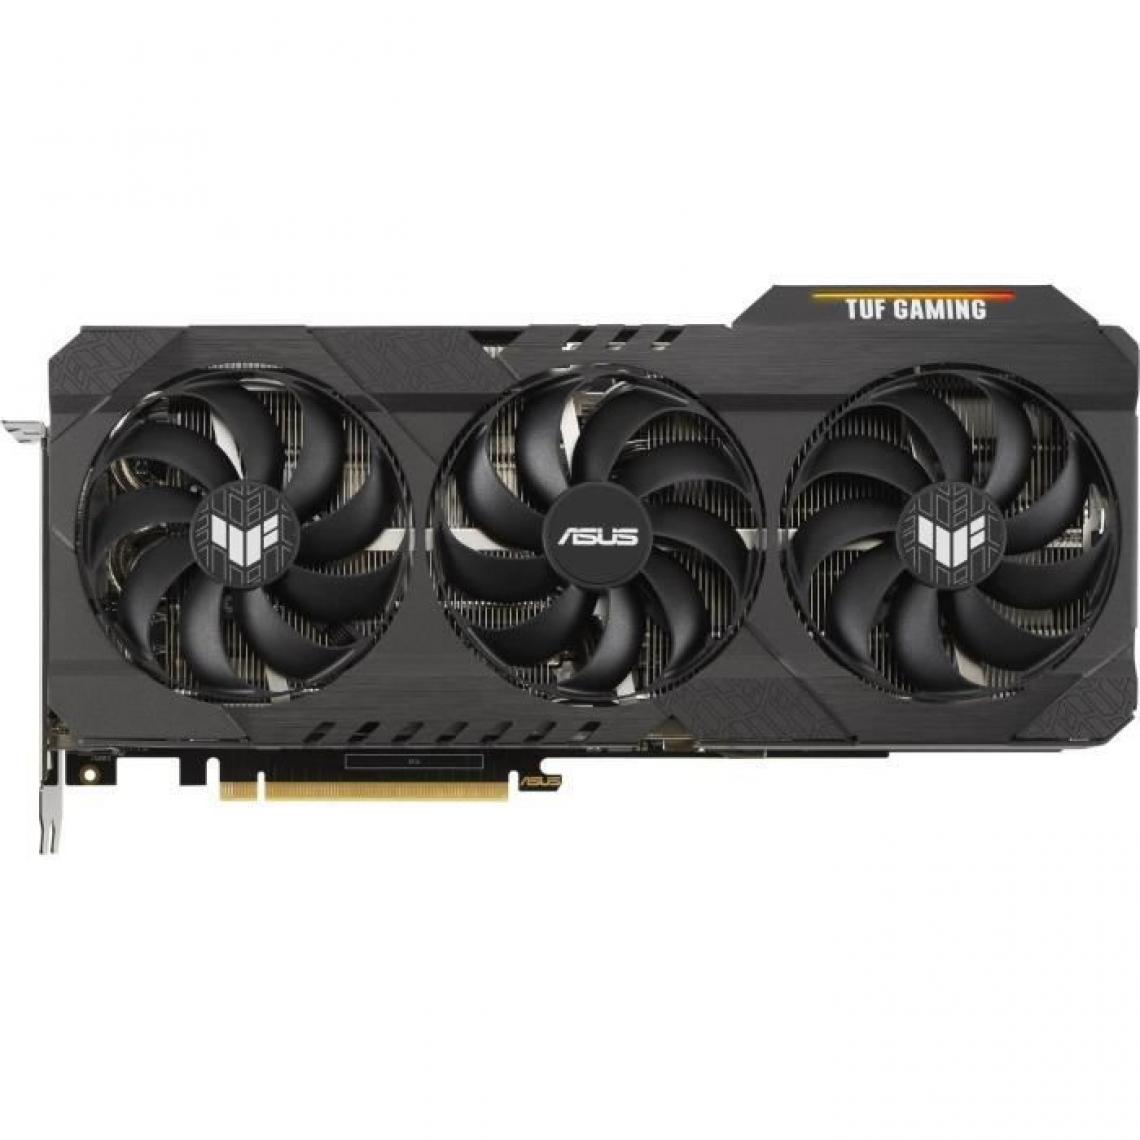 Asus - ASUS RTX 3070 Ti 8 Go GDDR6 PCIe 4.0 2 x HDMI / 3 x DP (90YV0GY0-M0NA00) - Carte Graphique NVIDIA